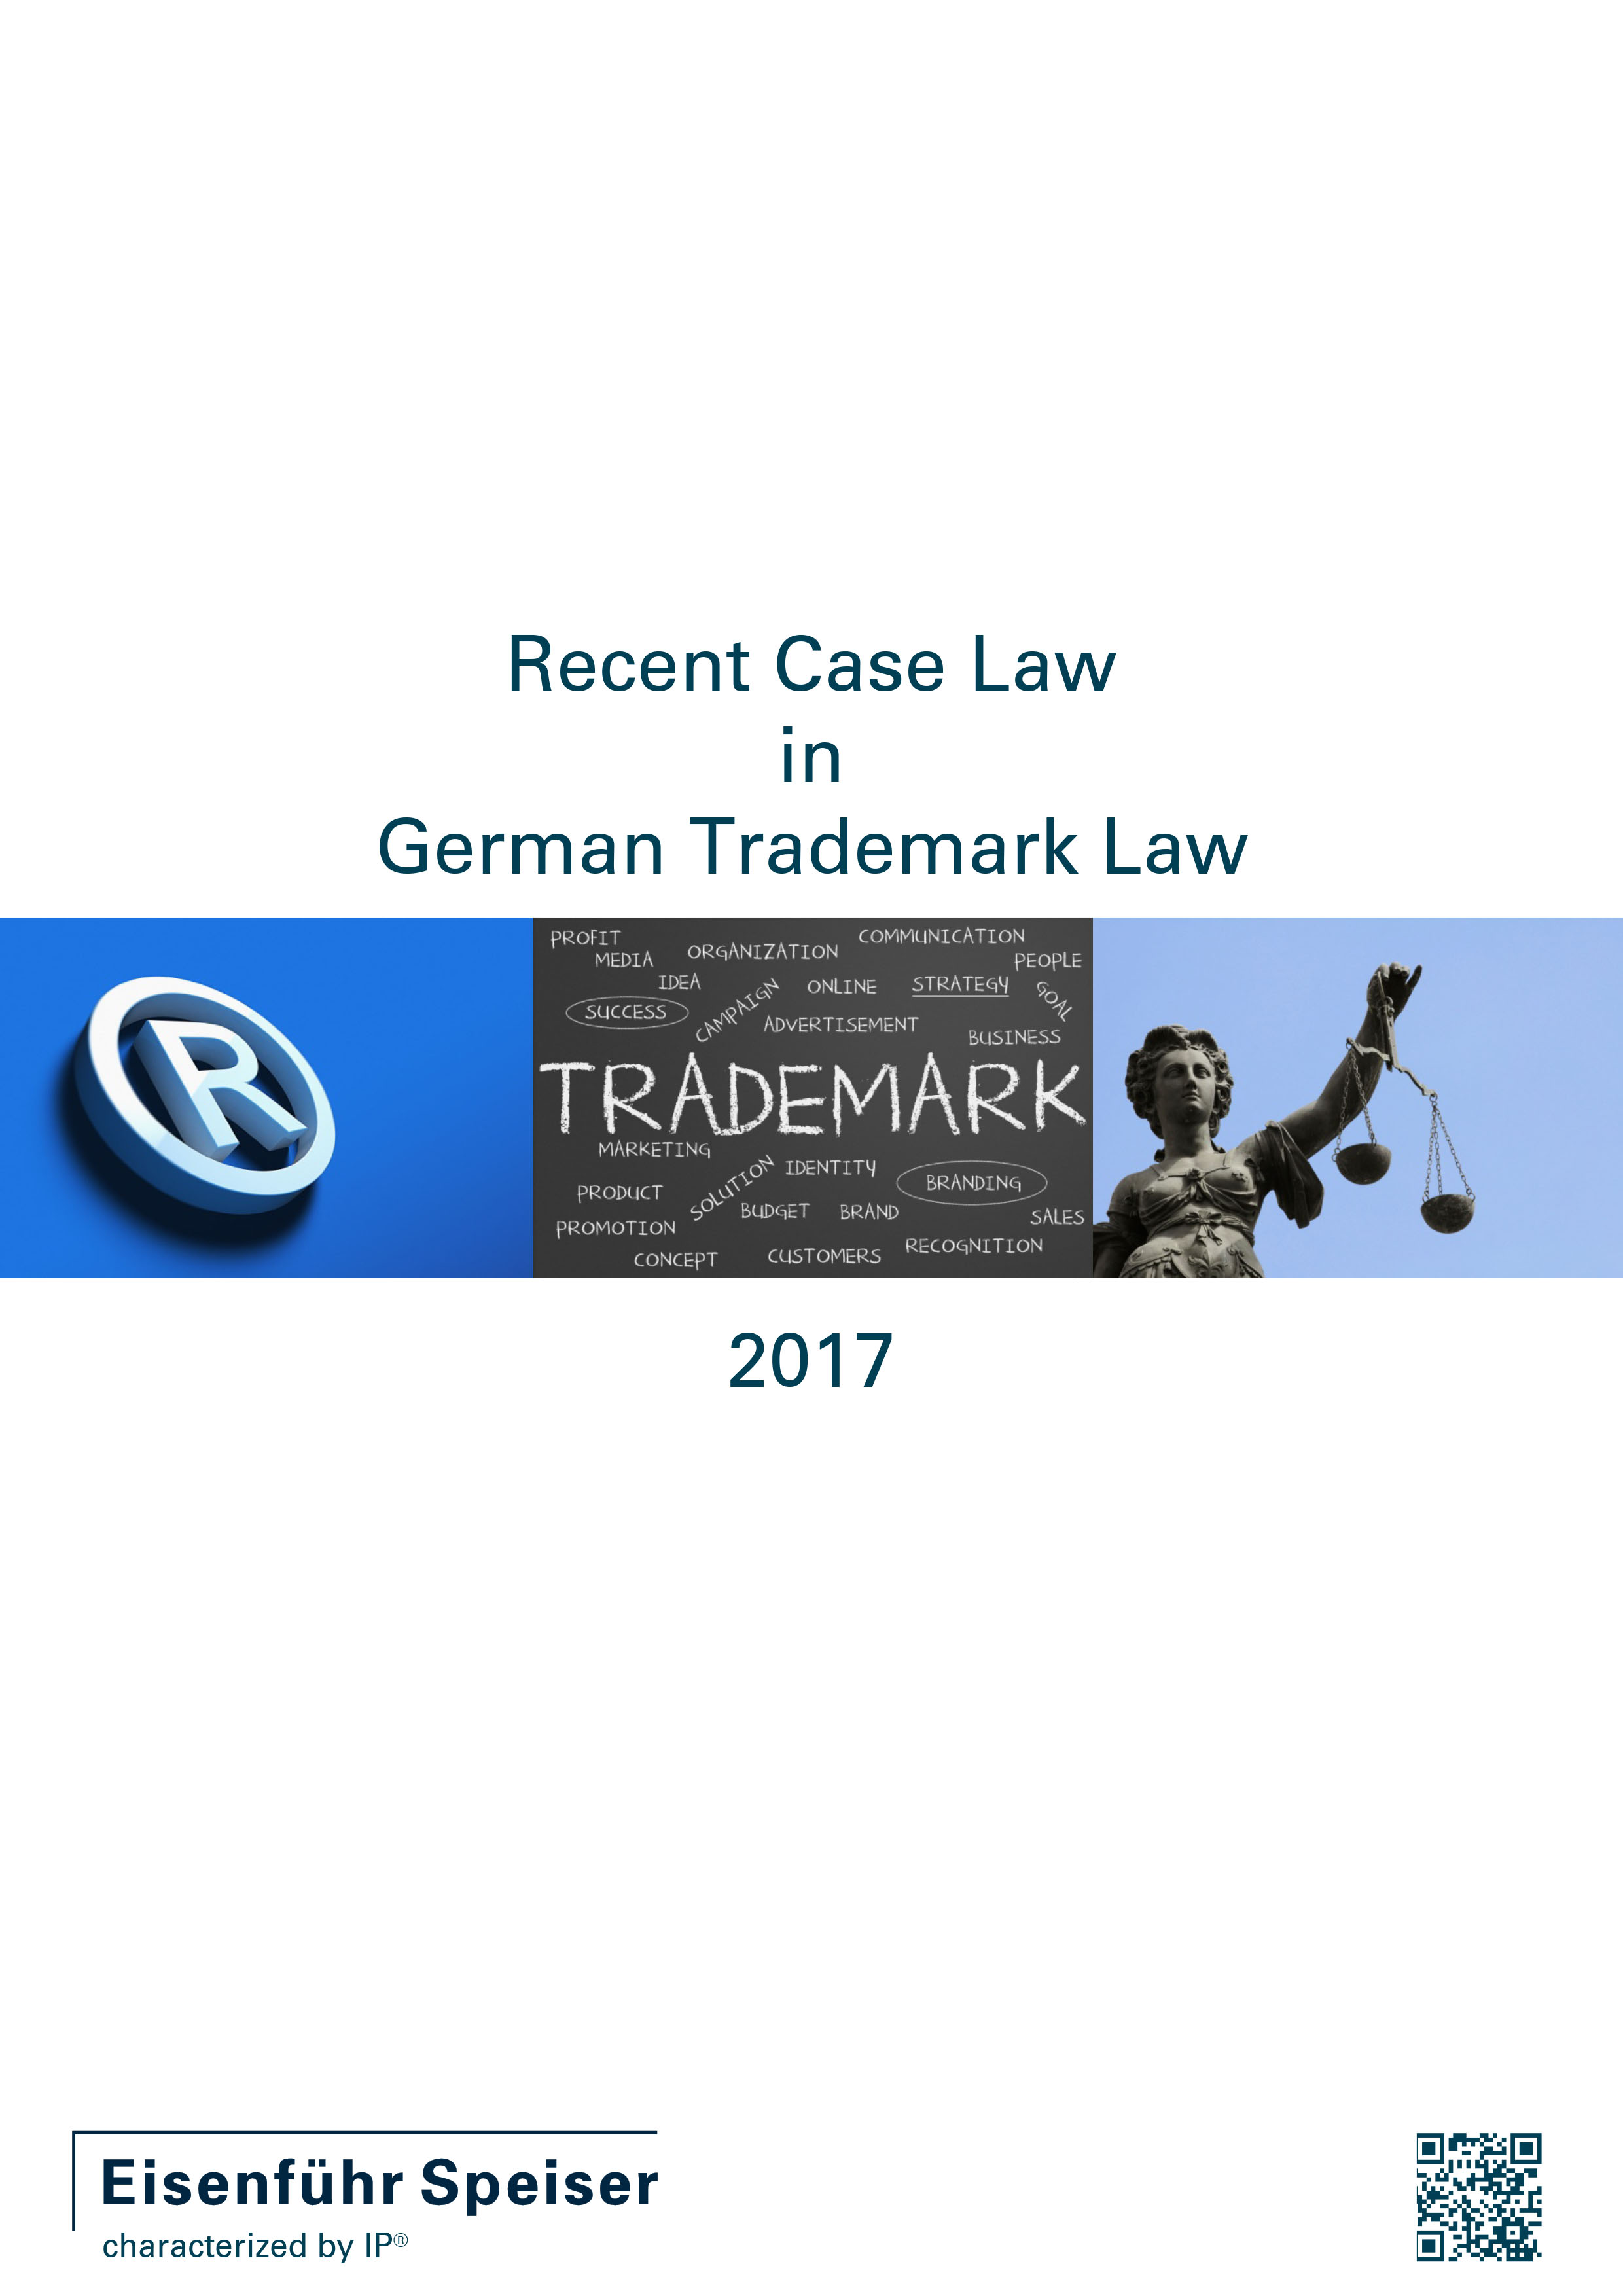 Recent Case Law in German Trademark Law 2017